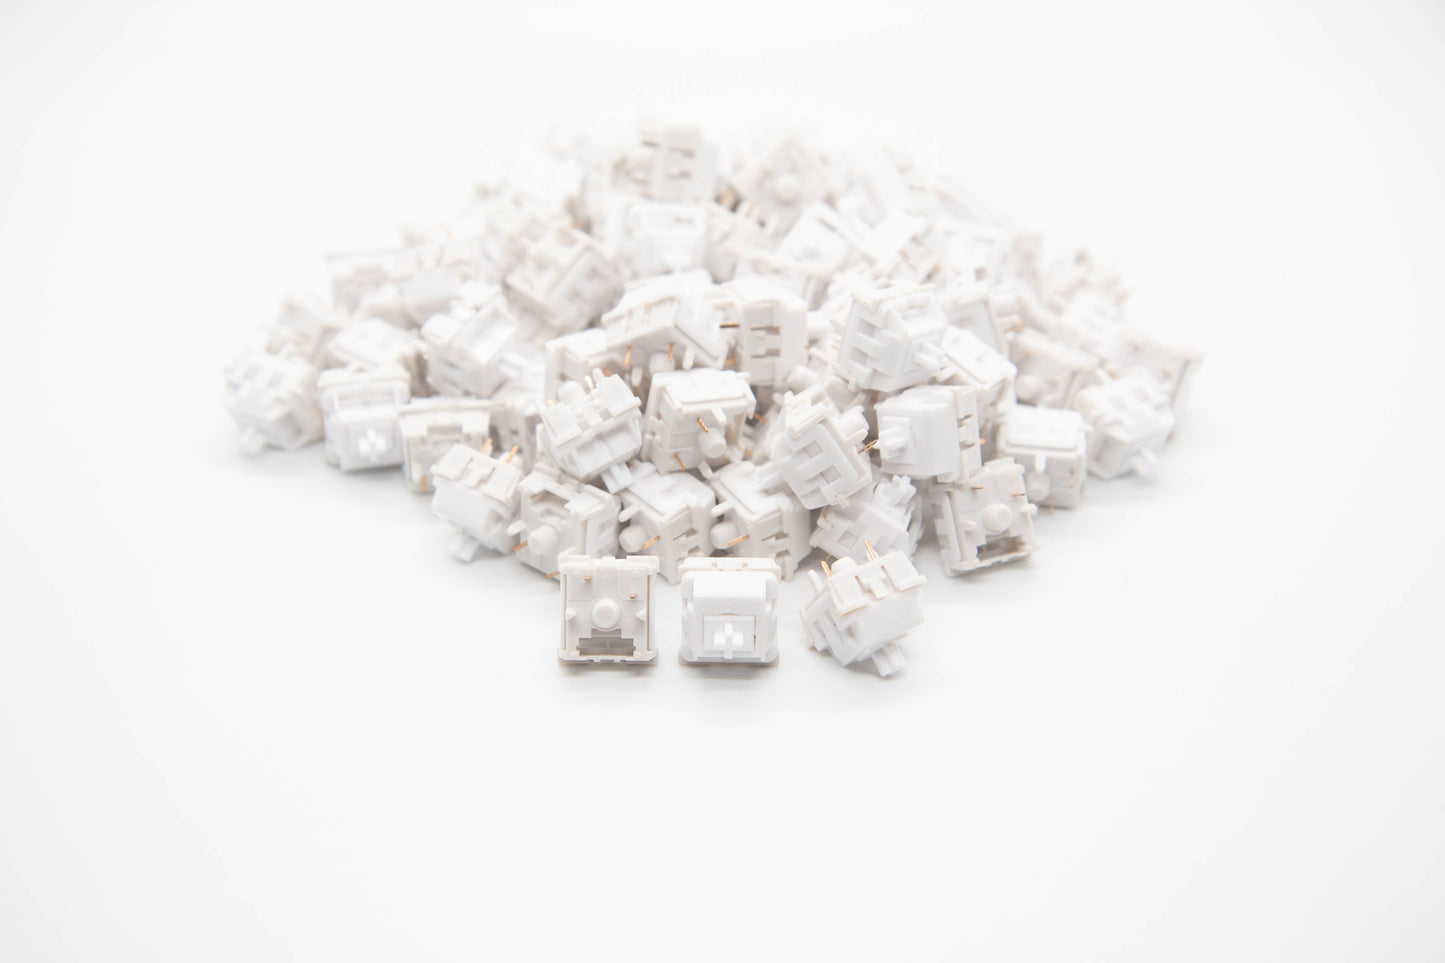 Close-up shot of a pile of KTT Monochrome Chalk mechanical keyboard switches featuring white housing and white stems